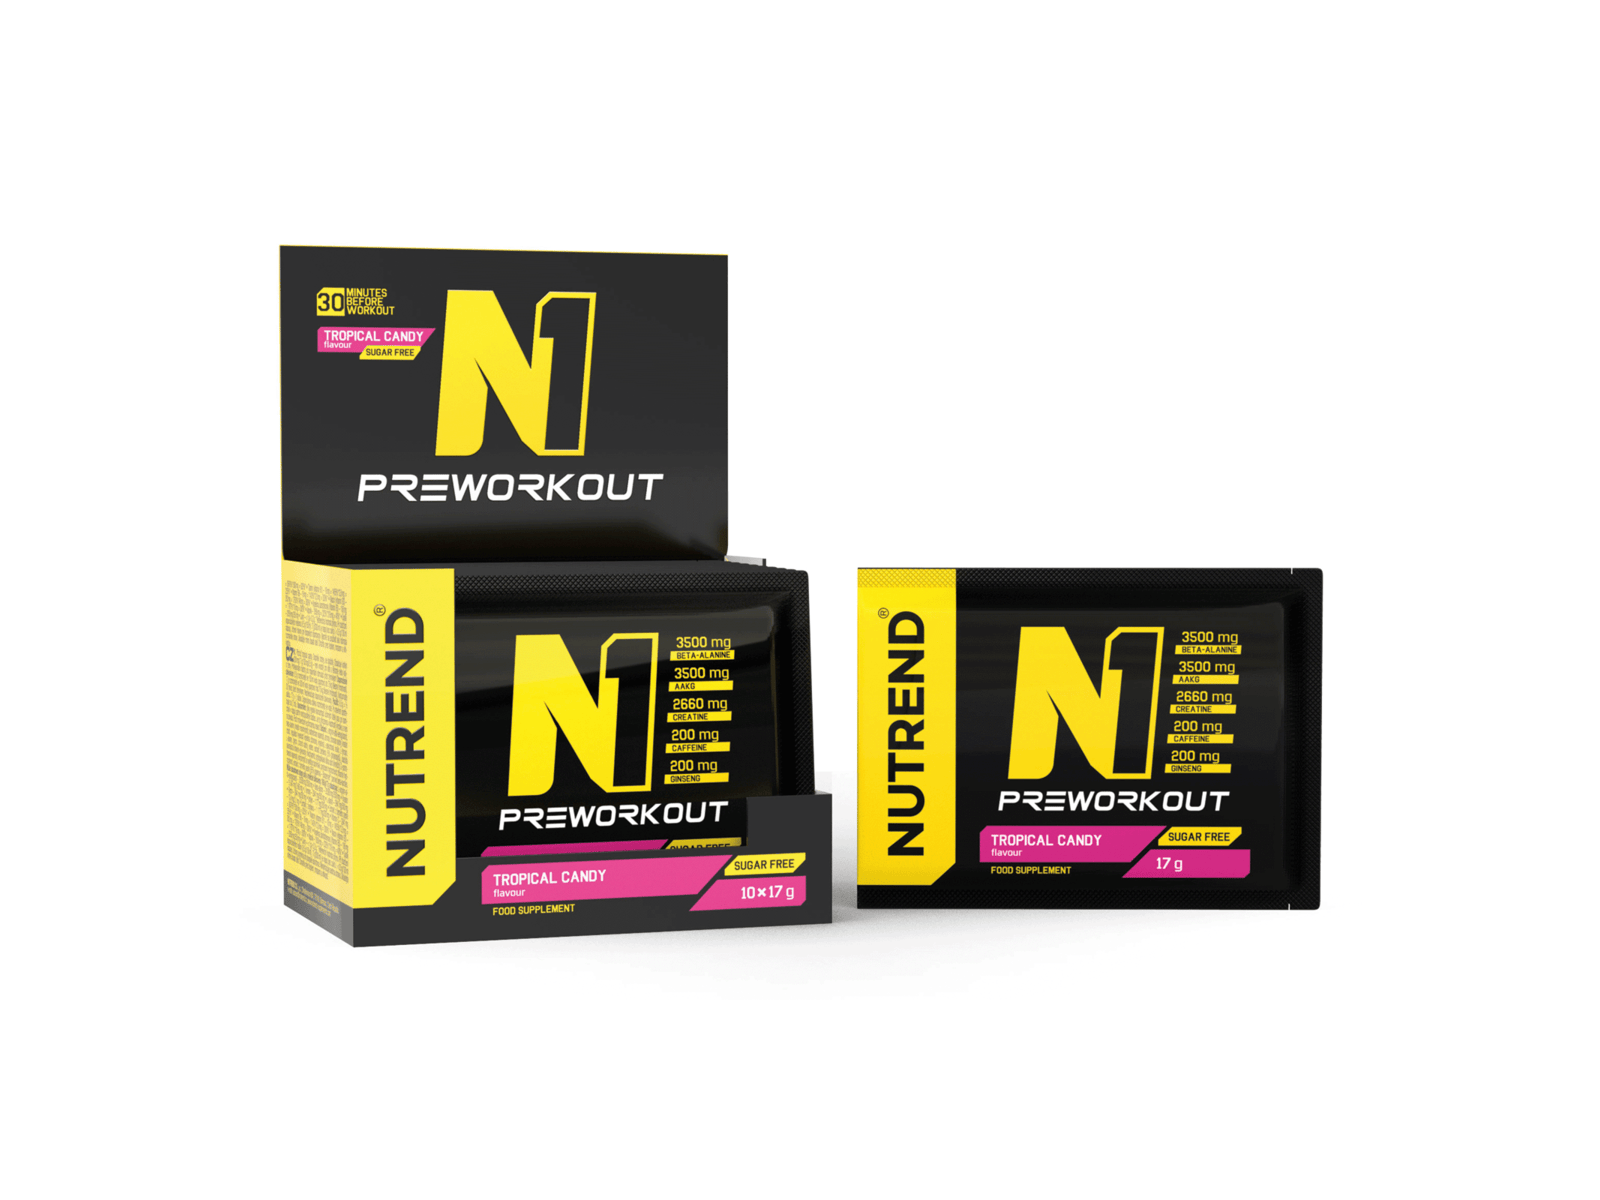 N1 Pre-Workout (Tropical Candy - 10 x 17gr) - NUTREND